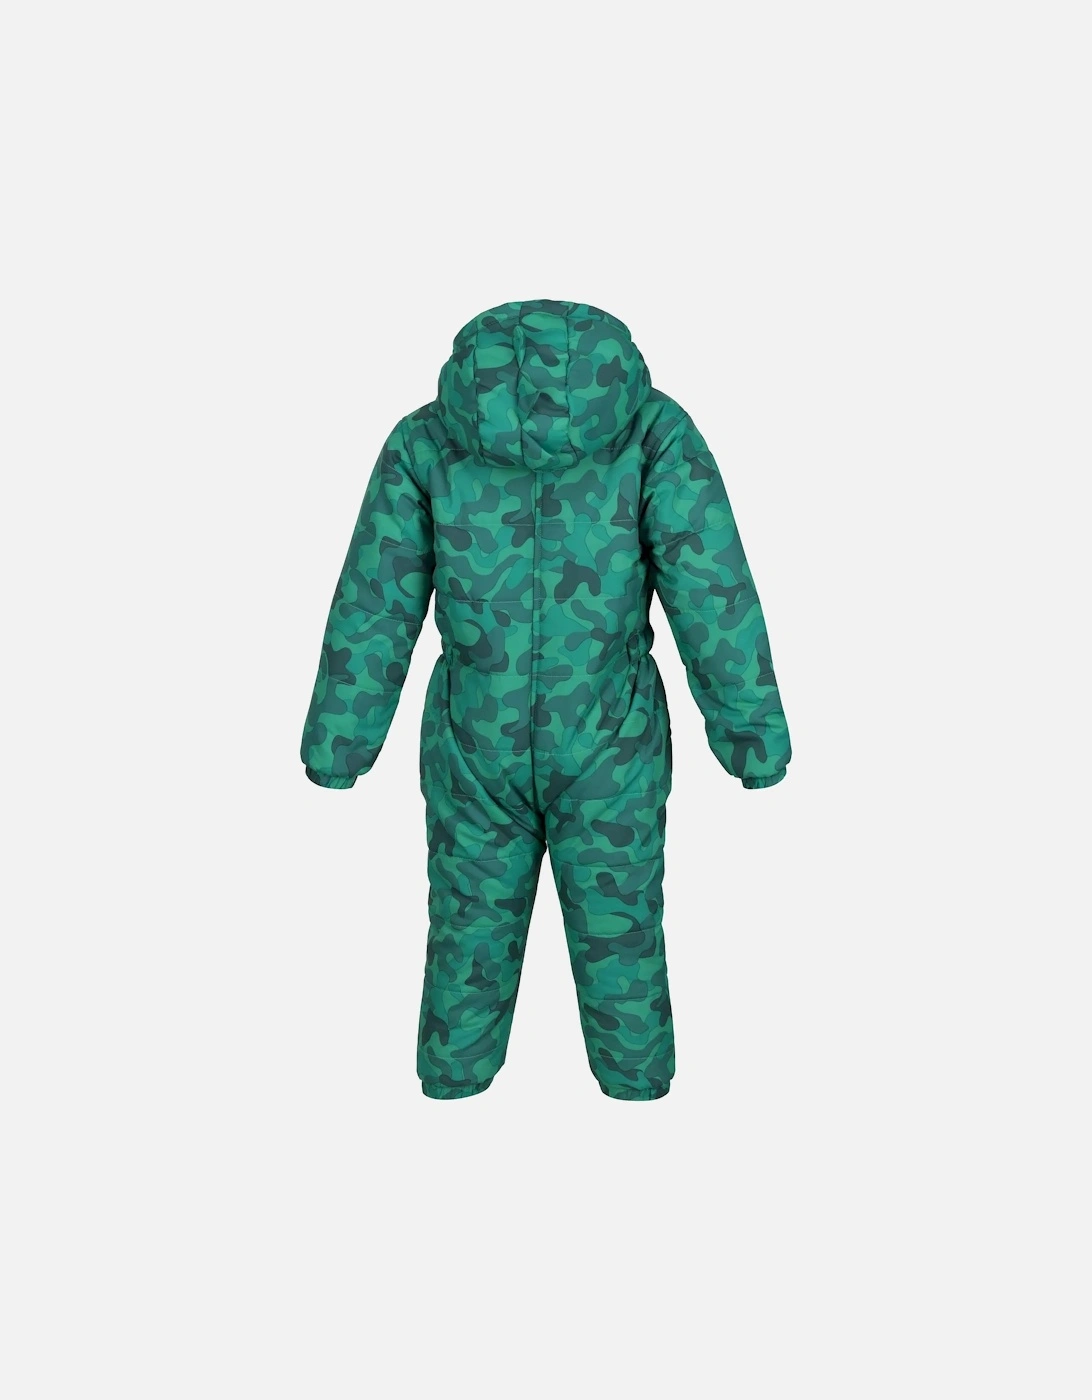 Childrens/Kids Penrose Camo Puddle Suit